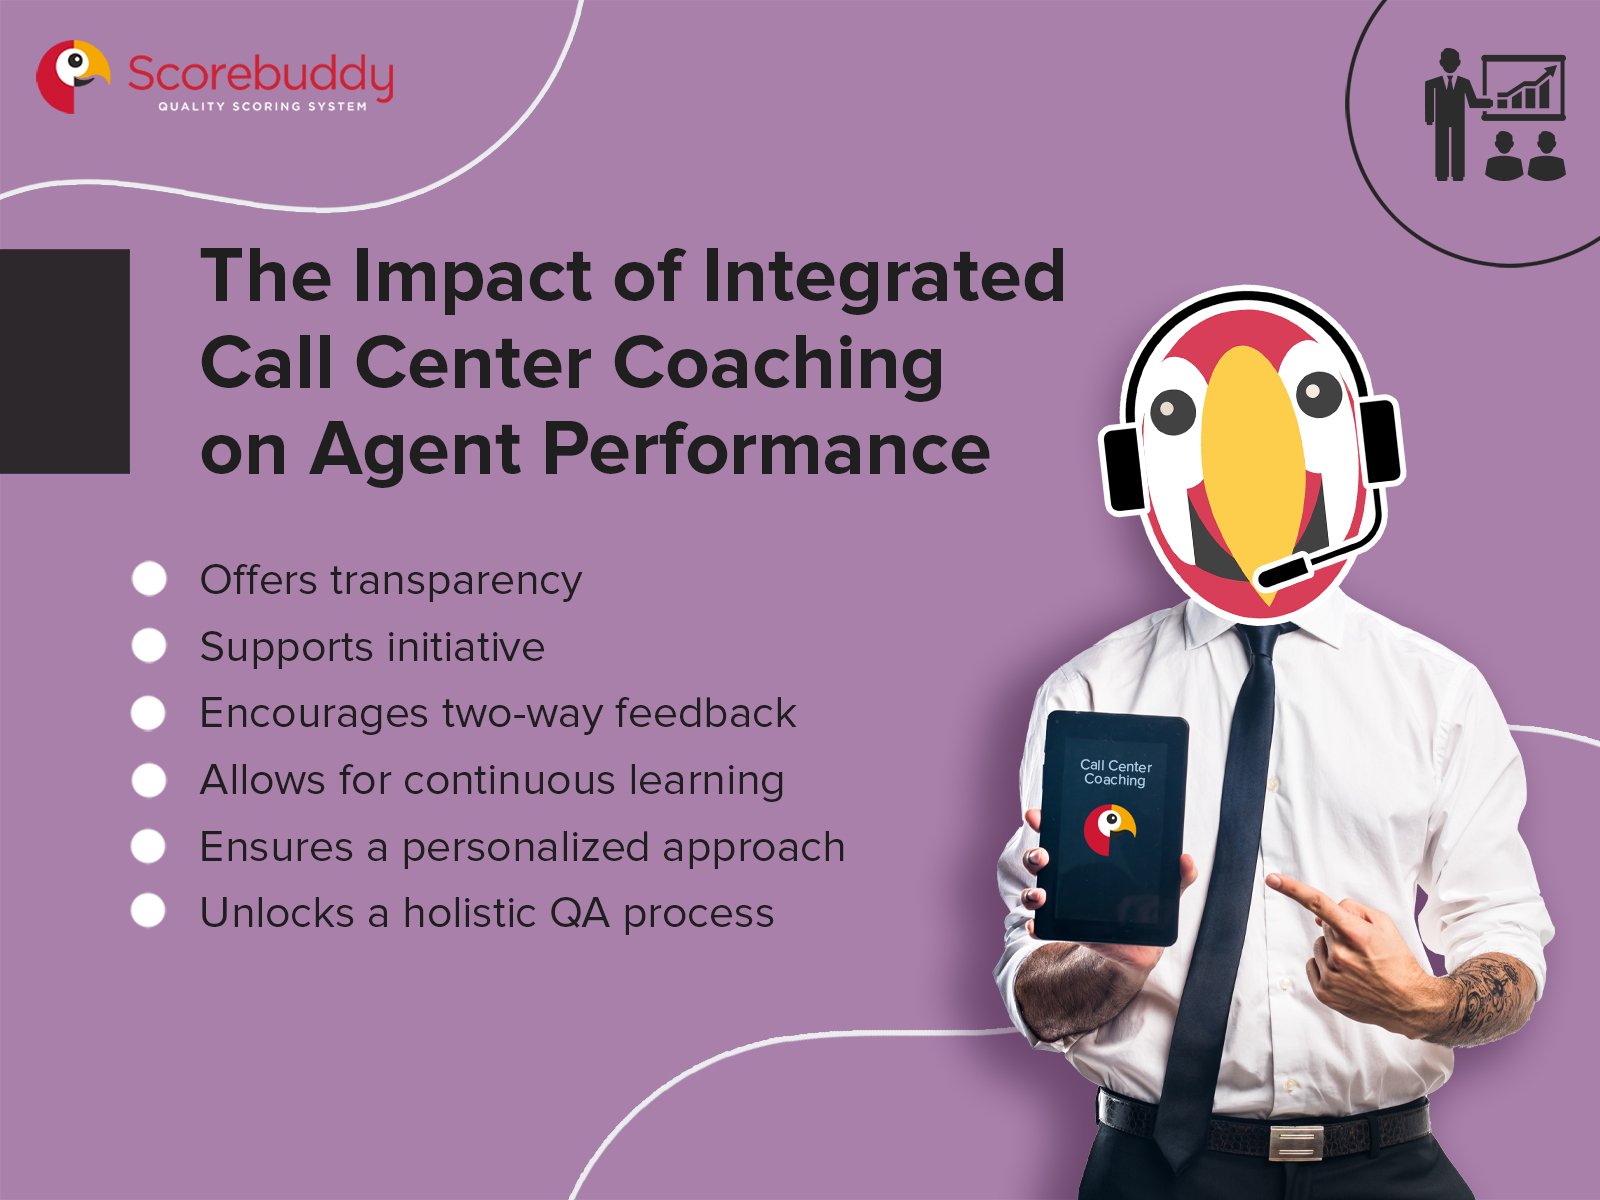 The Impact of Integrated Call Center Coaching on Agent Performance